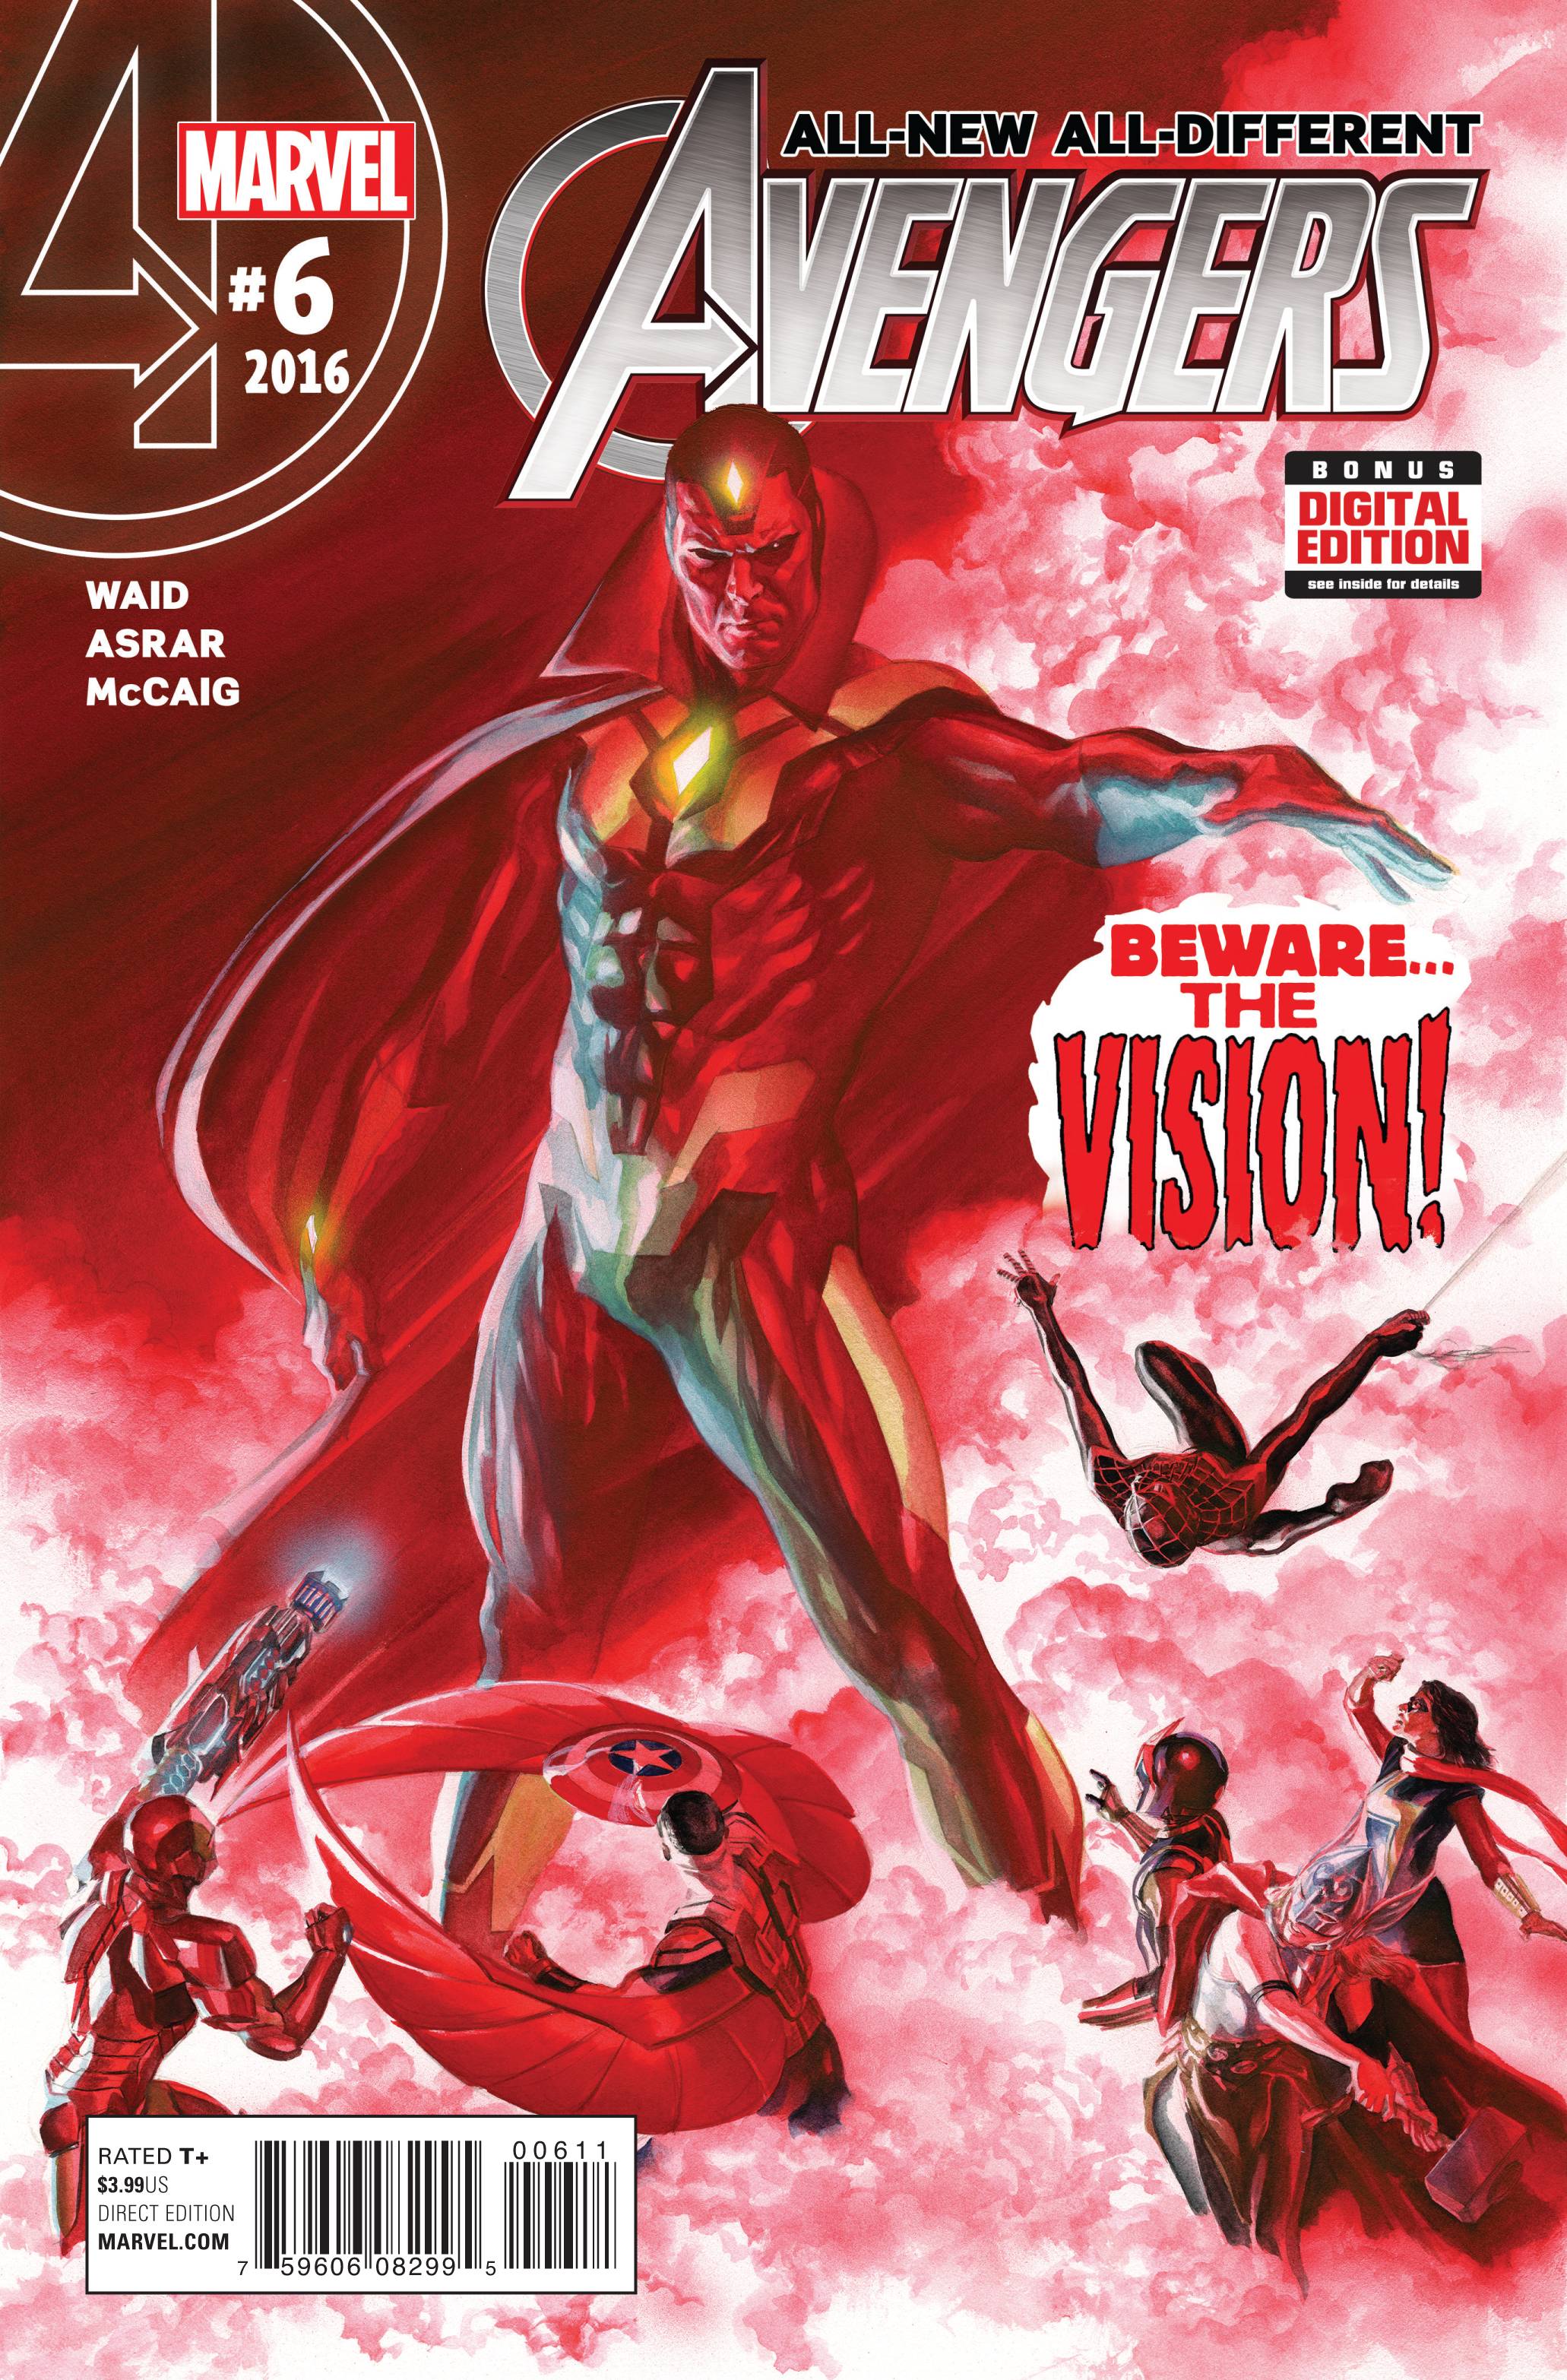 All New All Different Avengers #6 (2015)